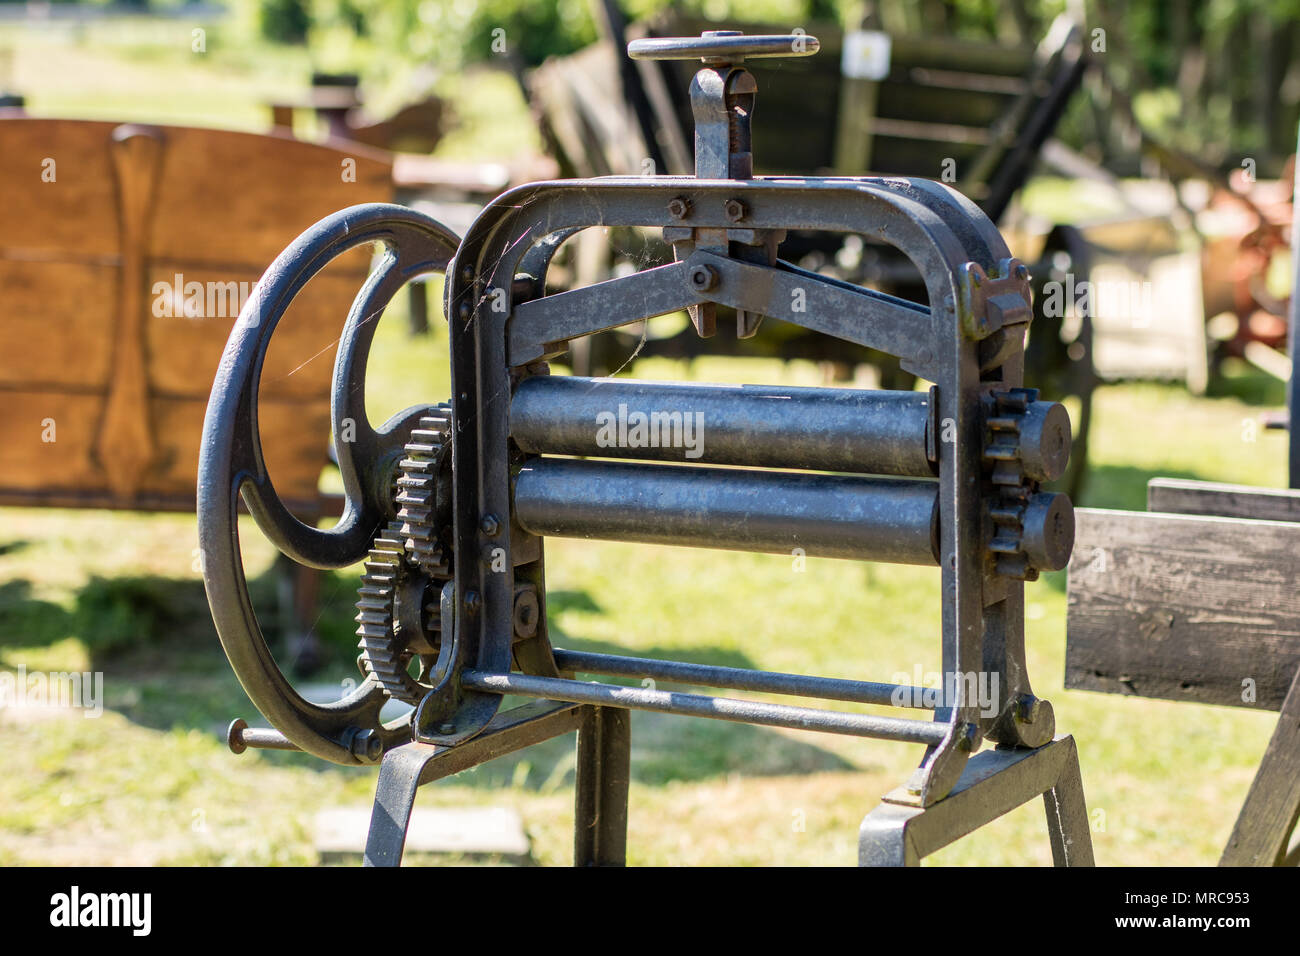 Old mangle for housework. Devices that facilitate housework in an old house. Season of the spring. Stock Photo